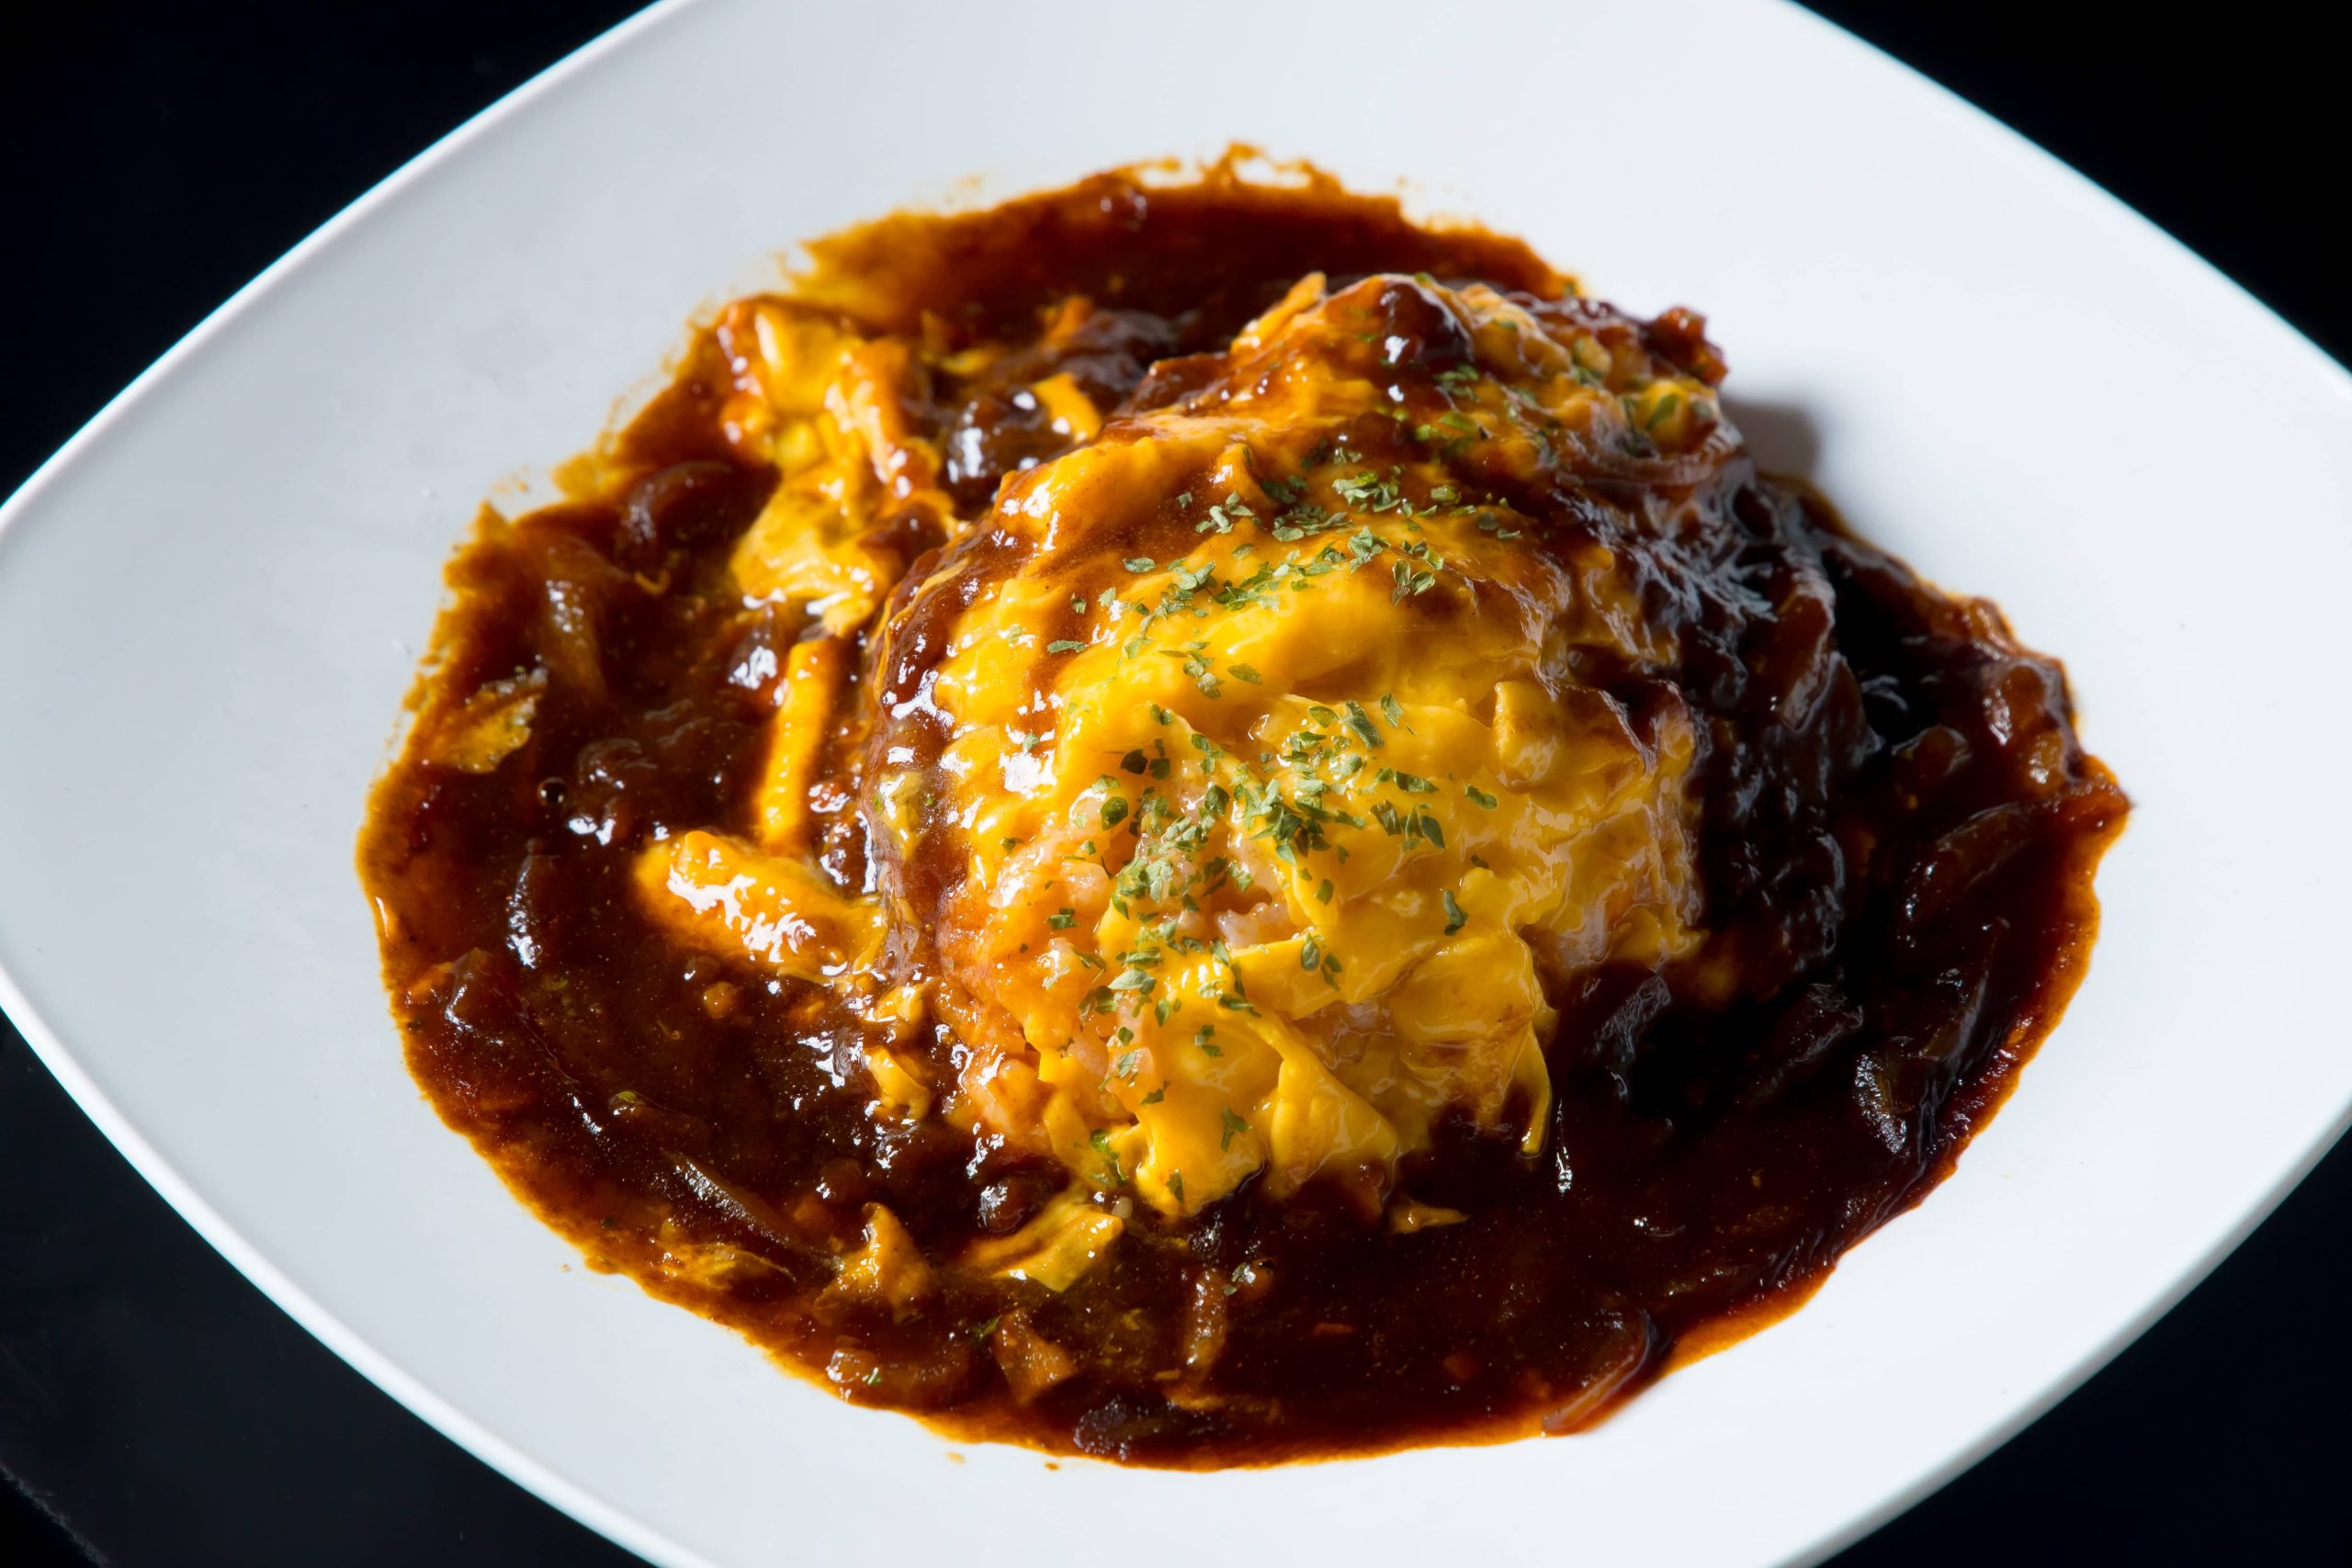 Omurice - from comfort food to fine dining